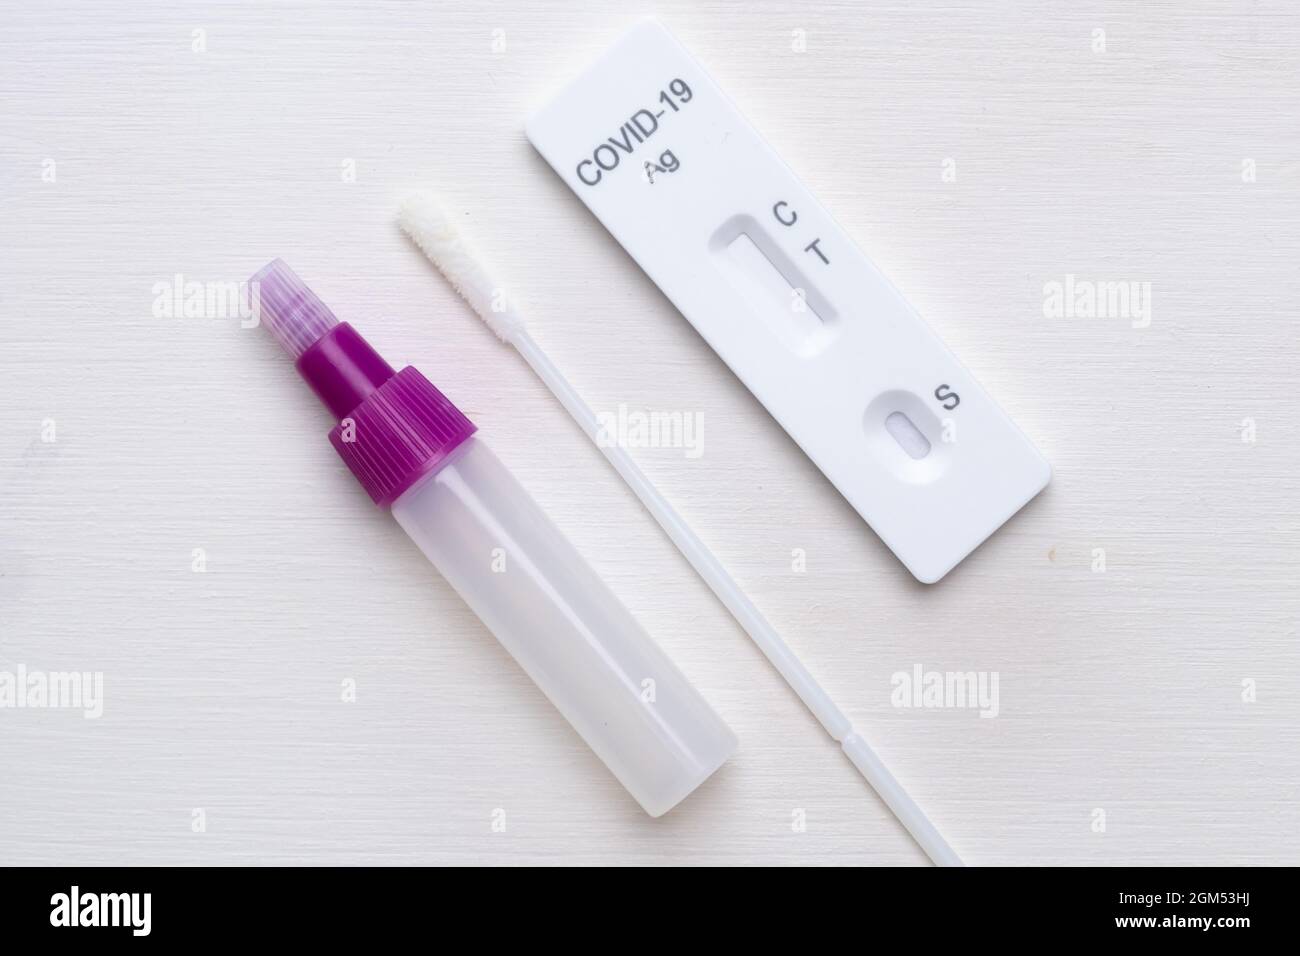 Rapid Antigen Test Covid-19 or SARS-Cov-2 kit with reagent and nasal swab stick on white background Stock Photo